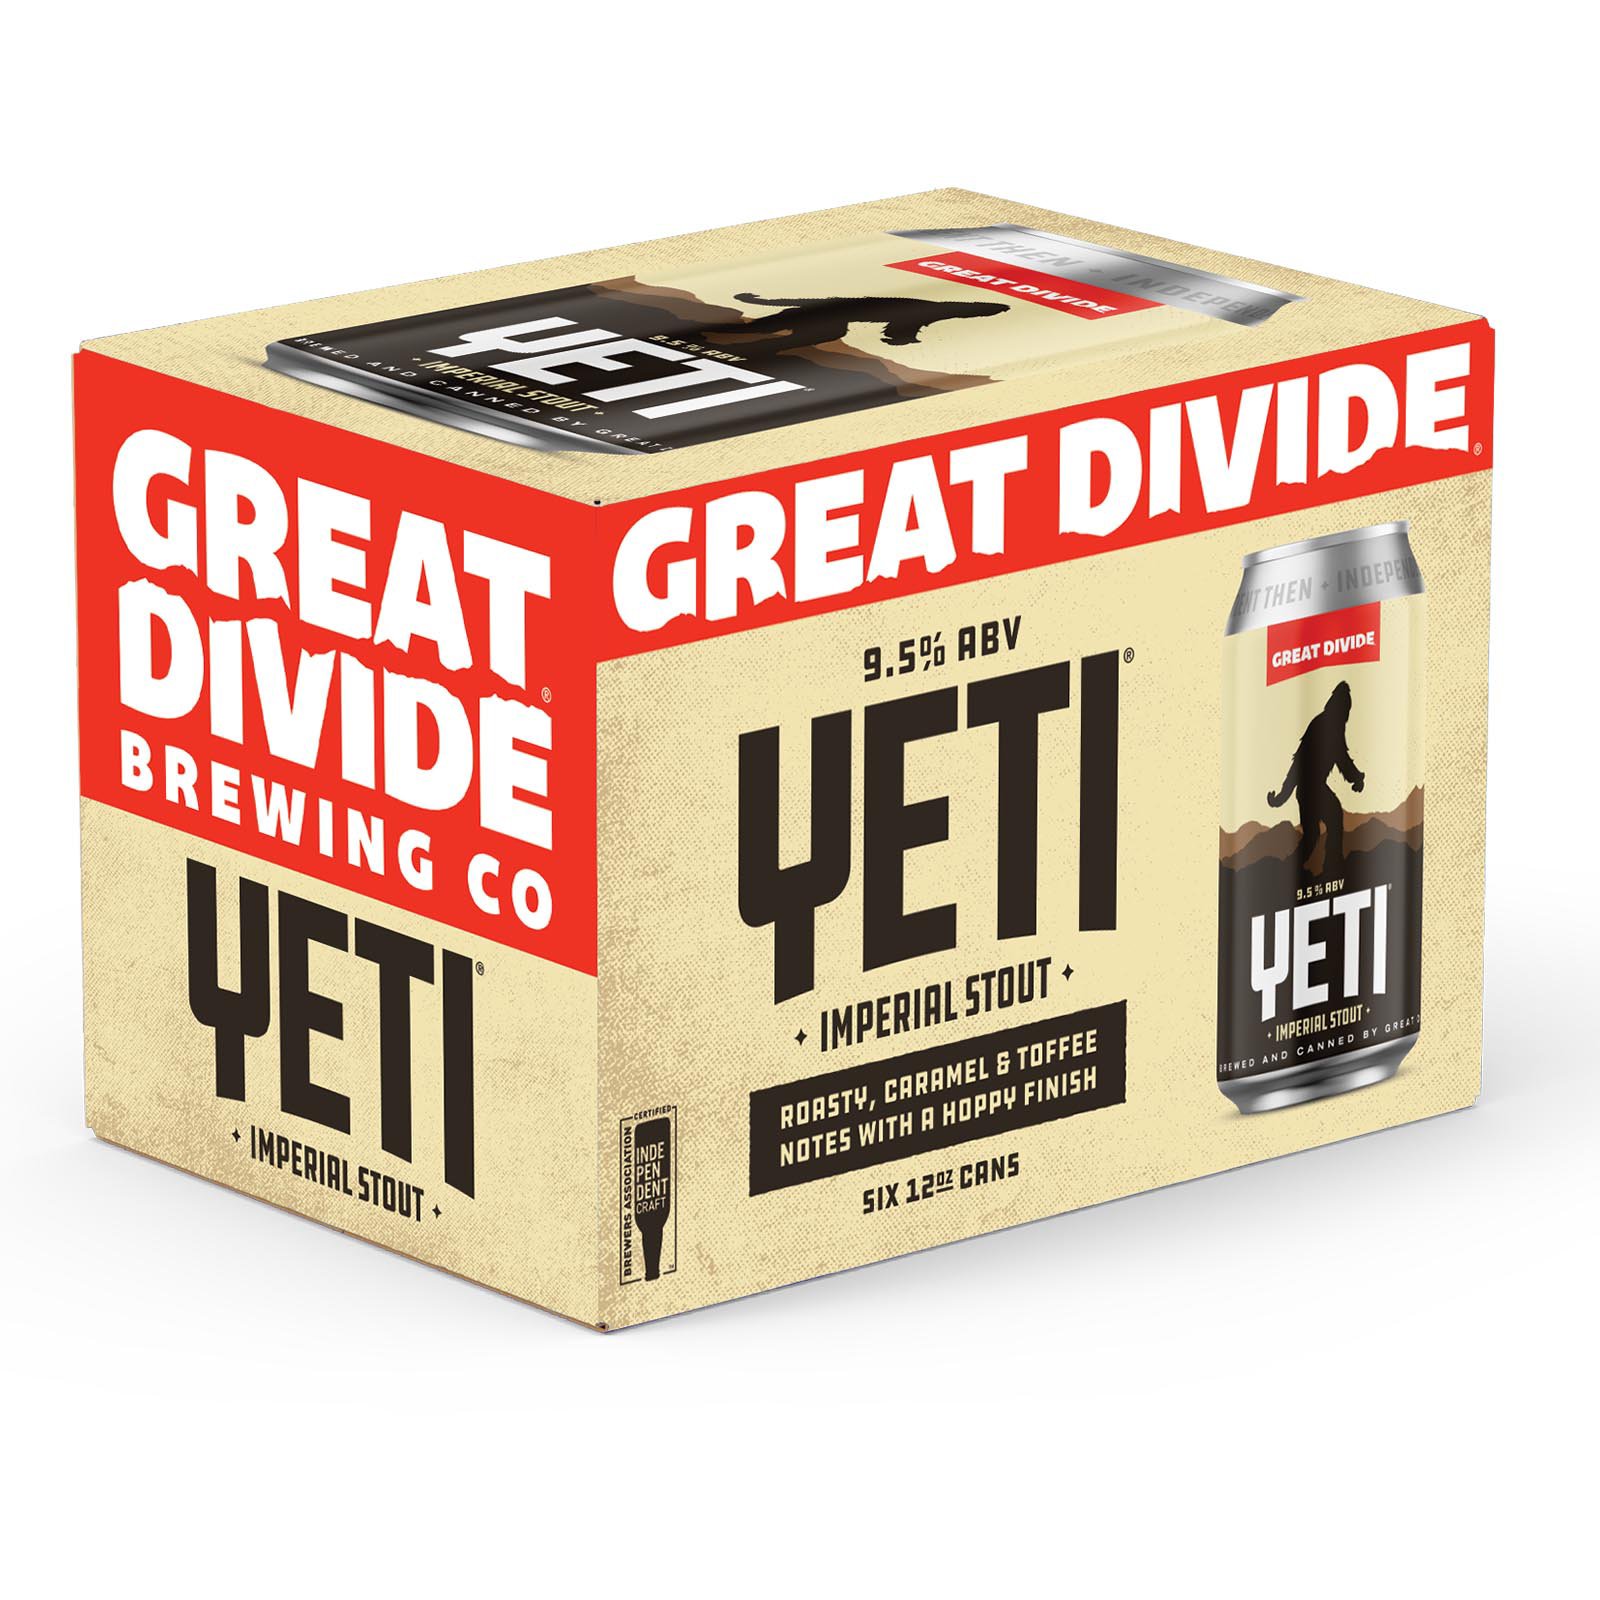 We provide Great Divide Chocolate Oak Aged Yeti Great Divide Brewing Co.  for our valued customers at a reasonable cost, with a high level of service